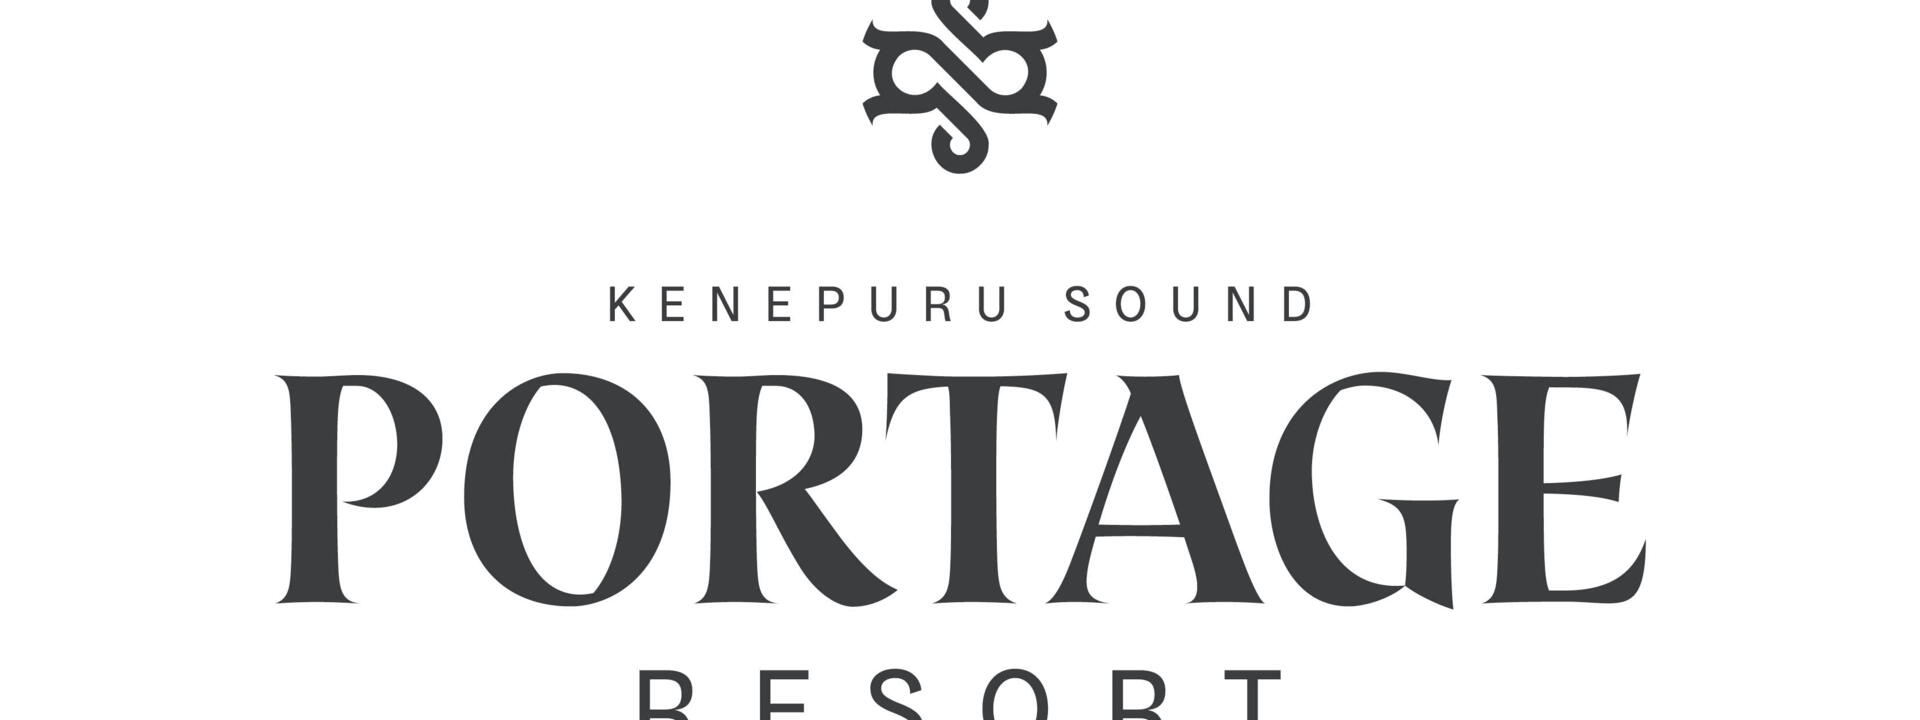 24125 ThePortageResort Brand Update Aug23 All Text & Icon.jpg